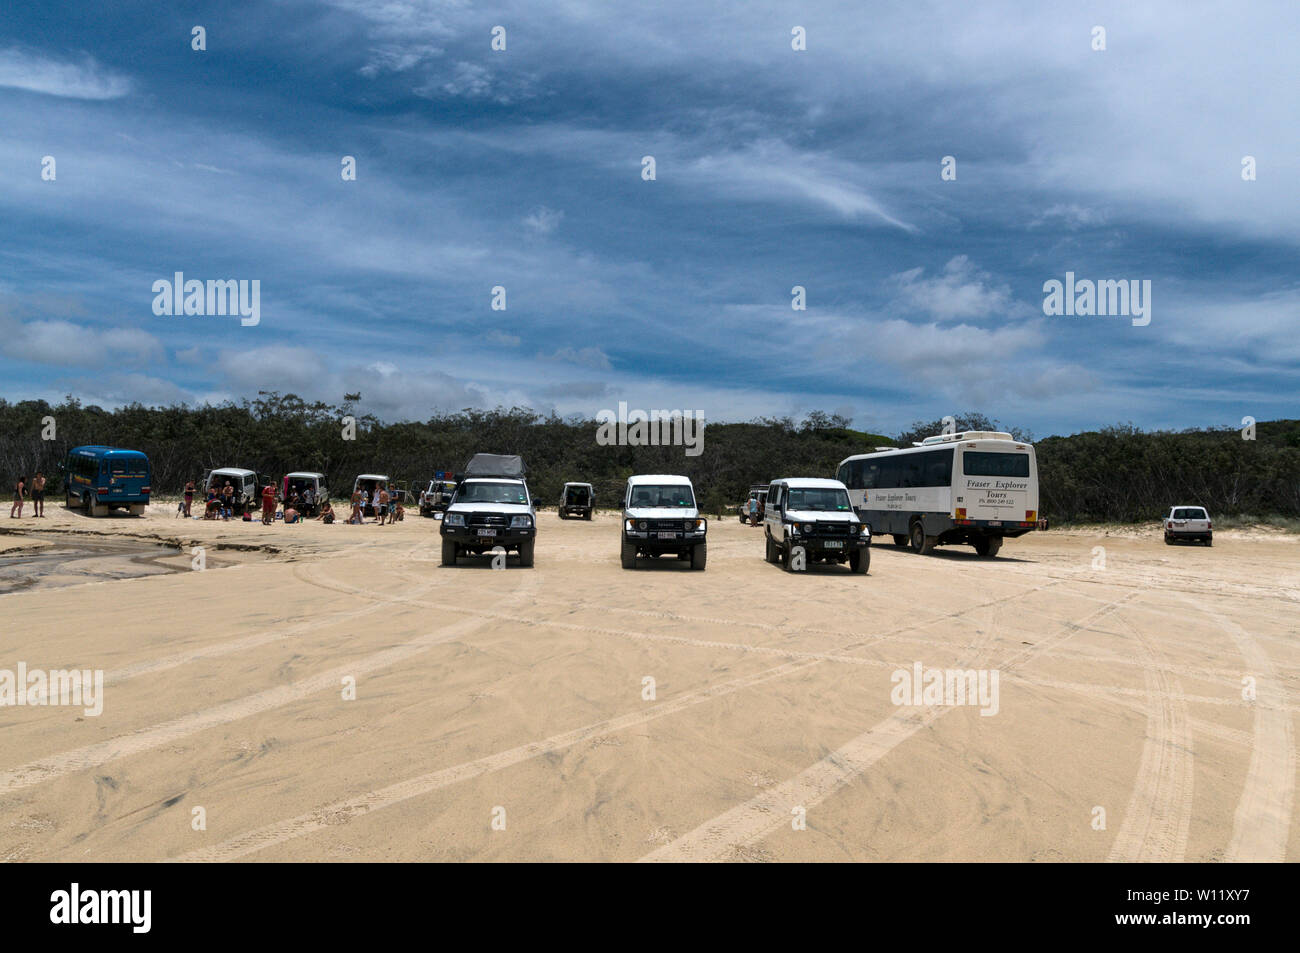 A large group of young backpackers and their vehicles on the 75 mile long Sandy Highway on the east coast of Fraser Island in Queensland, Australia  F Stock Photo